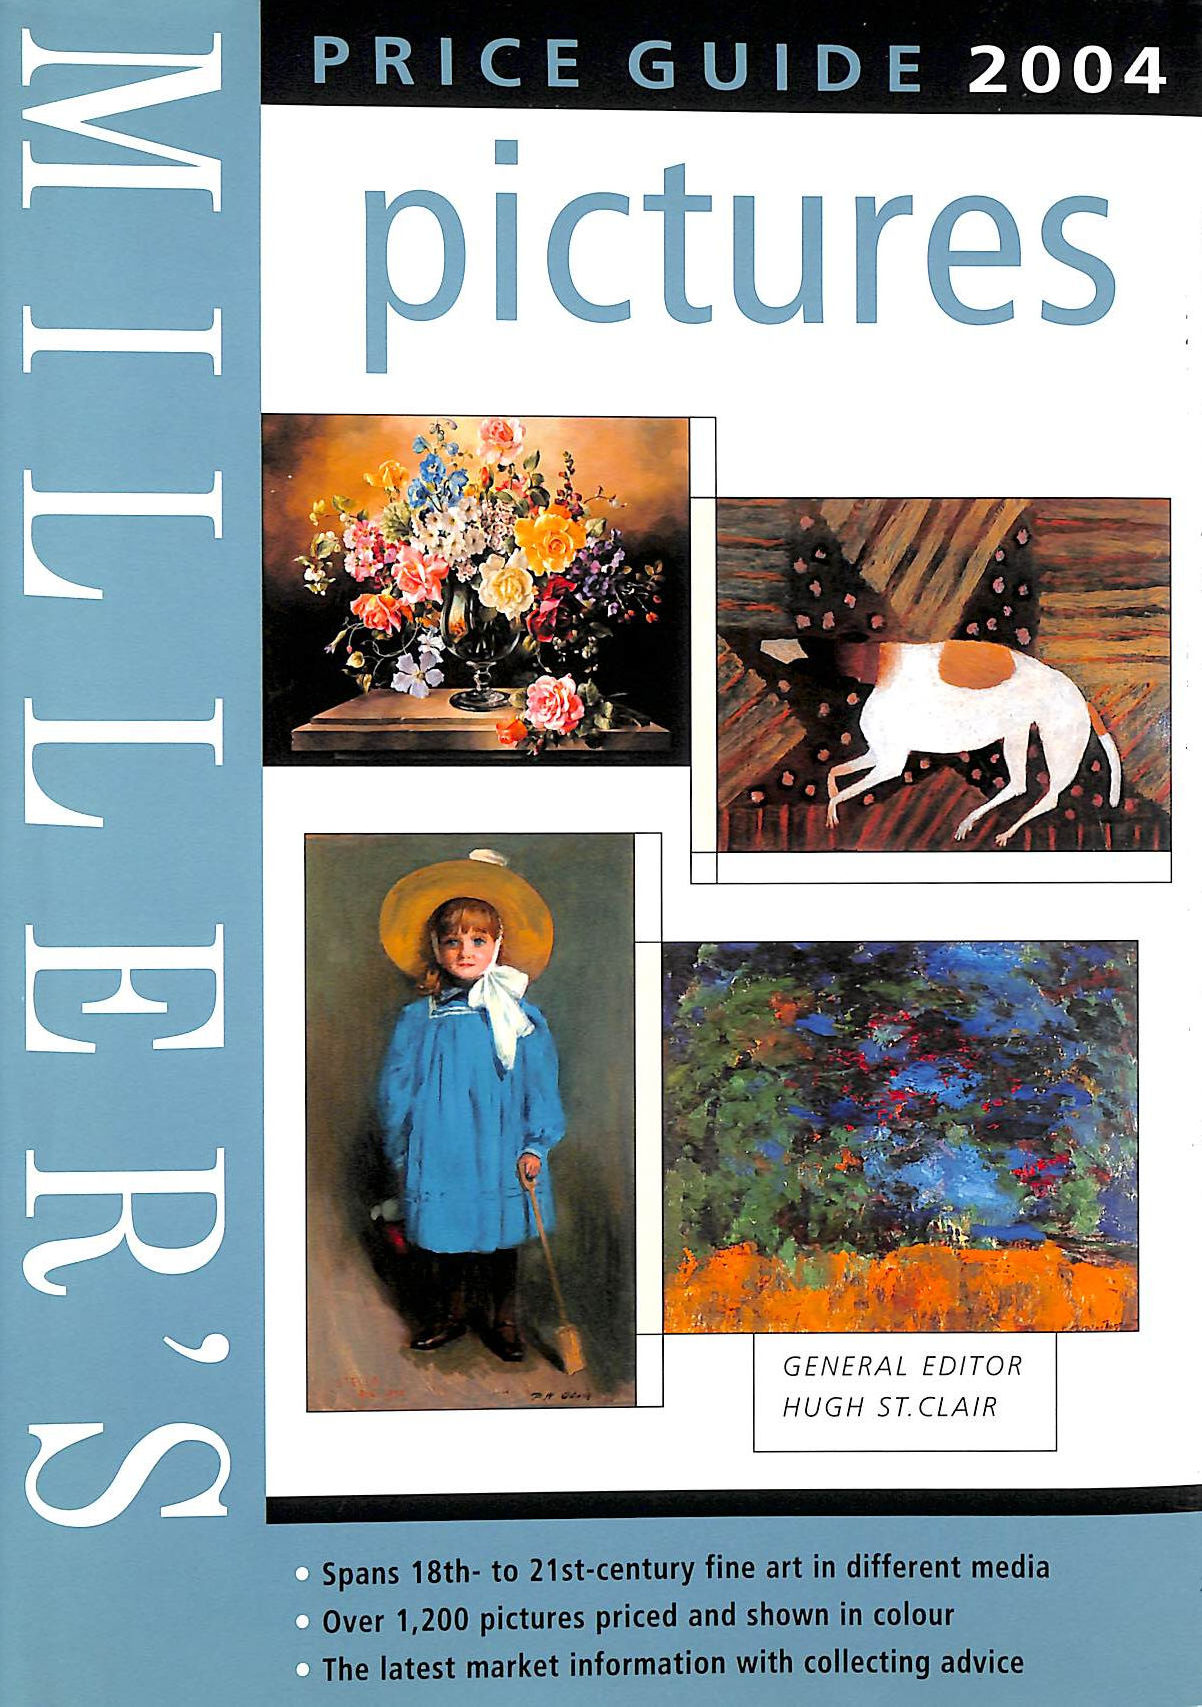 ST CLAIR, HUGH [EDITOR] - Miller's Picture Price Guide 2004 (Mitchell Beazley Antiques and Collectables)